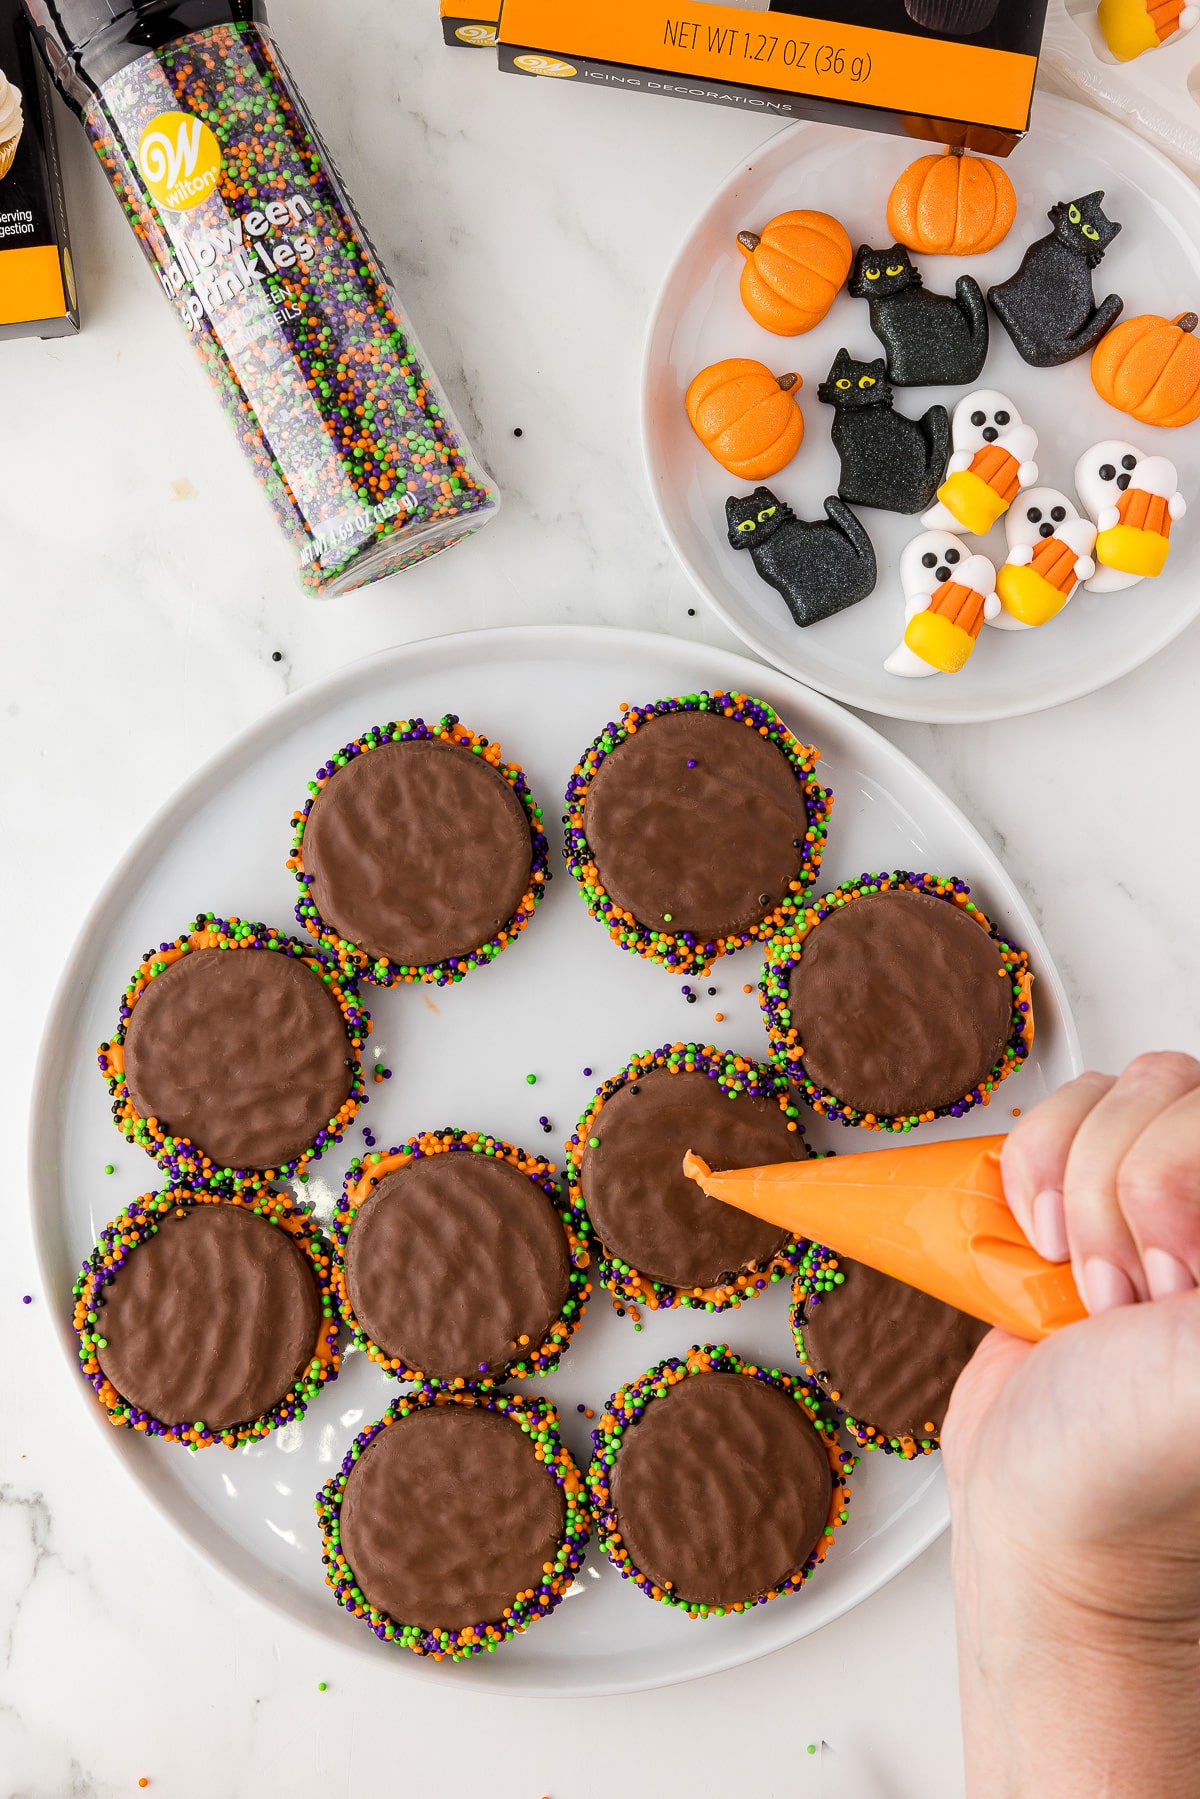 Orange melted chocolate dot on a fudge covered oreos on a white plate with halloween decorations and sprinkles on the counter. 